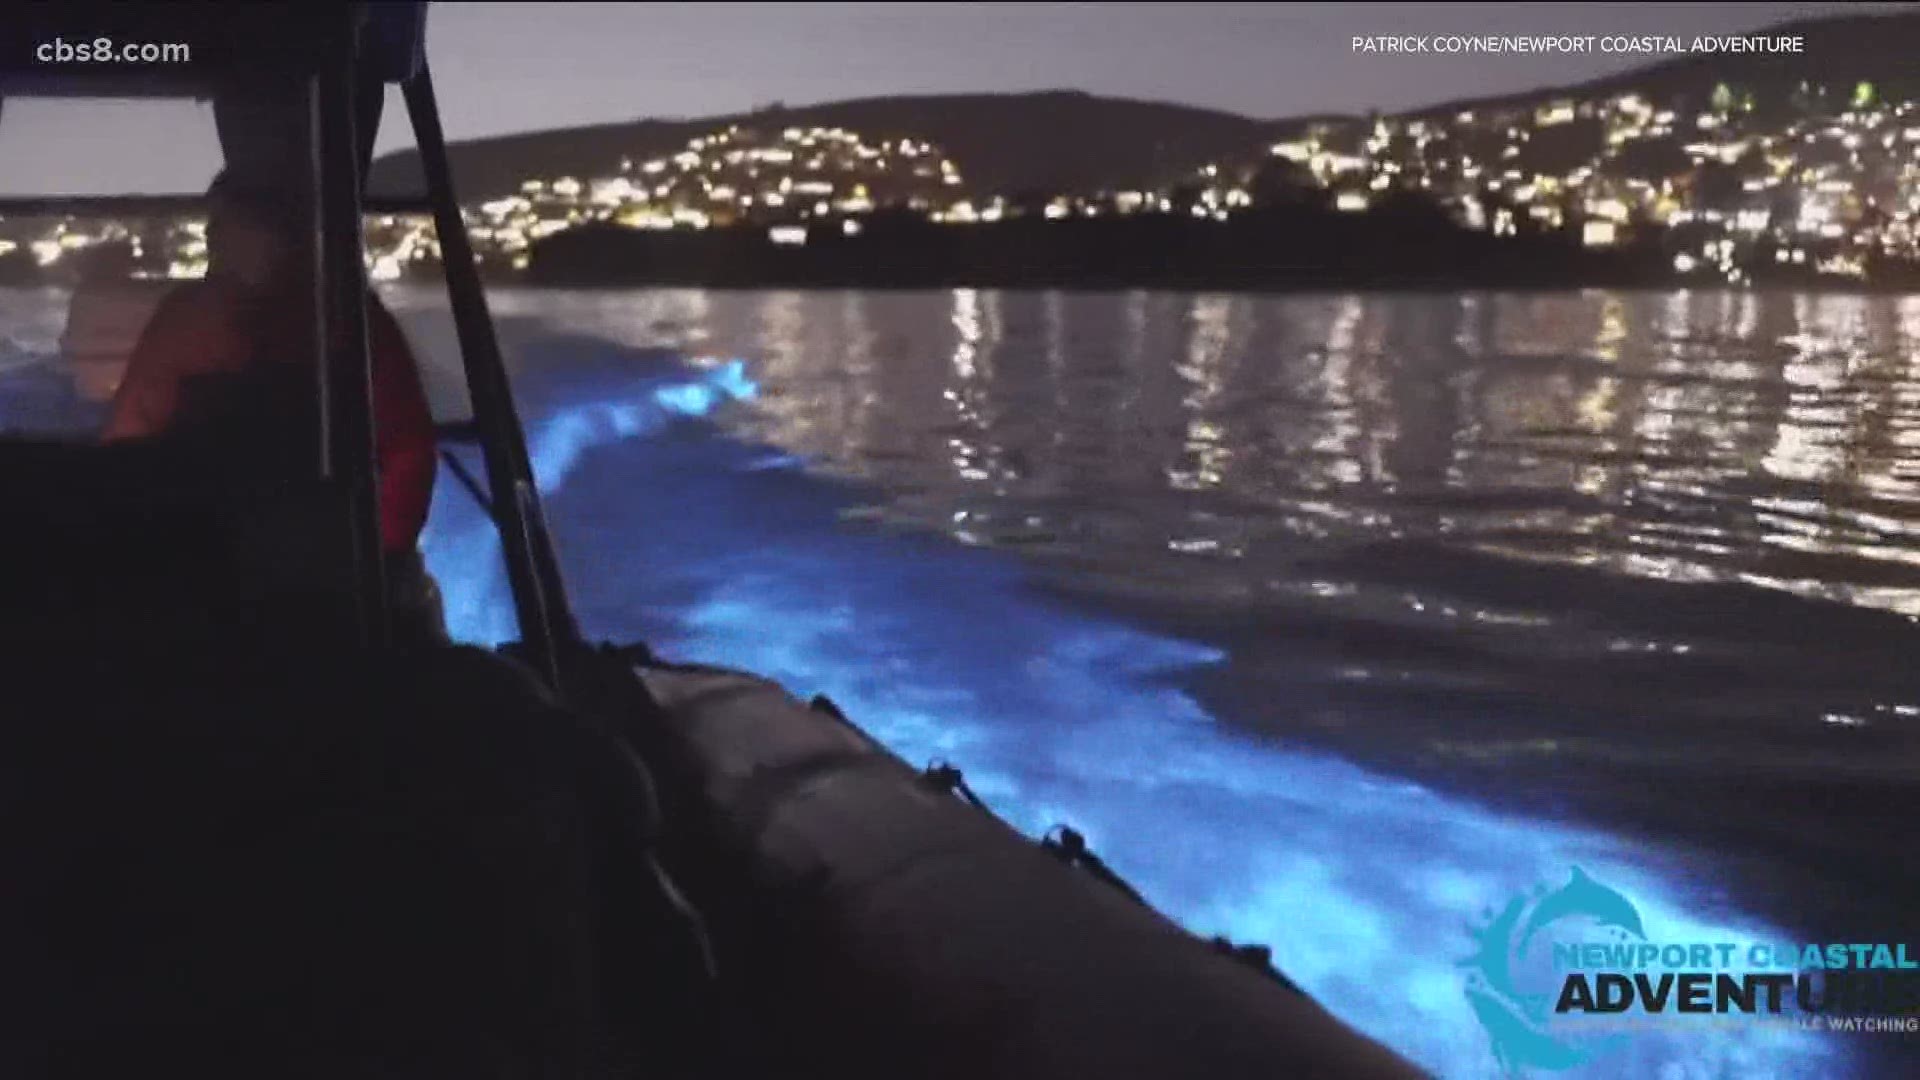 During the day, the algae bloom can cause the ocean to appear with a red or brown tint, but at night, when agitated, it can create a blue bioluminescence.